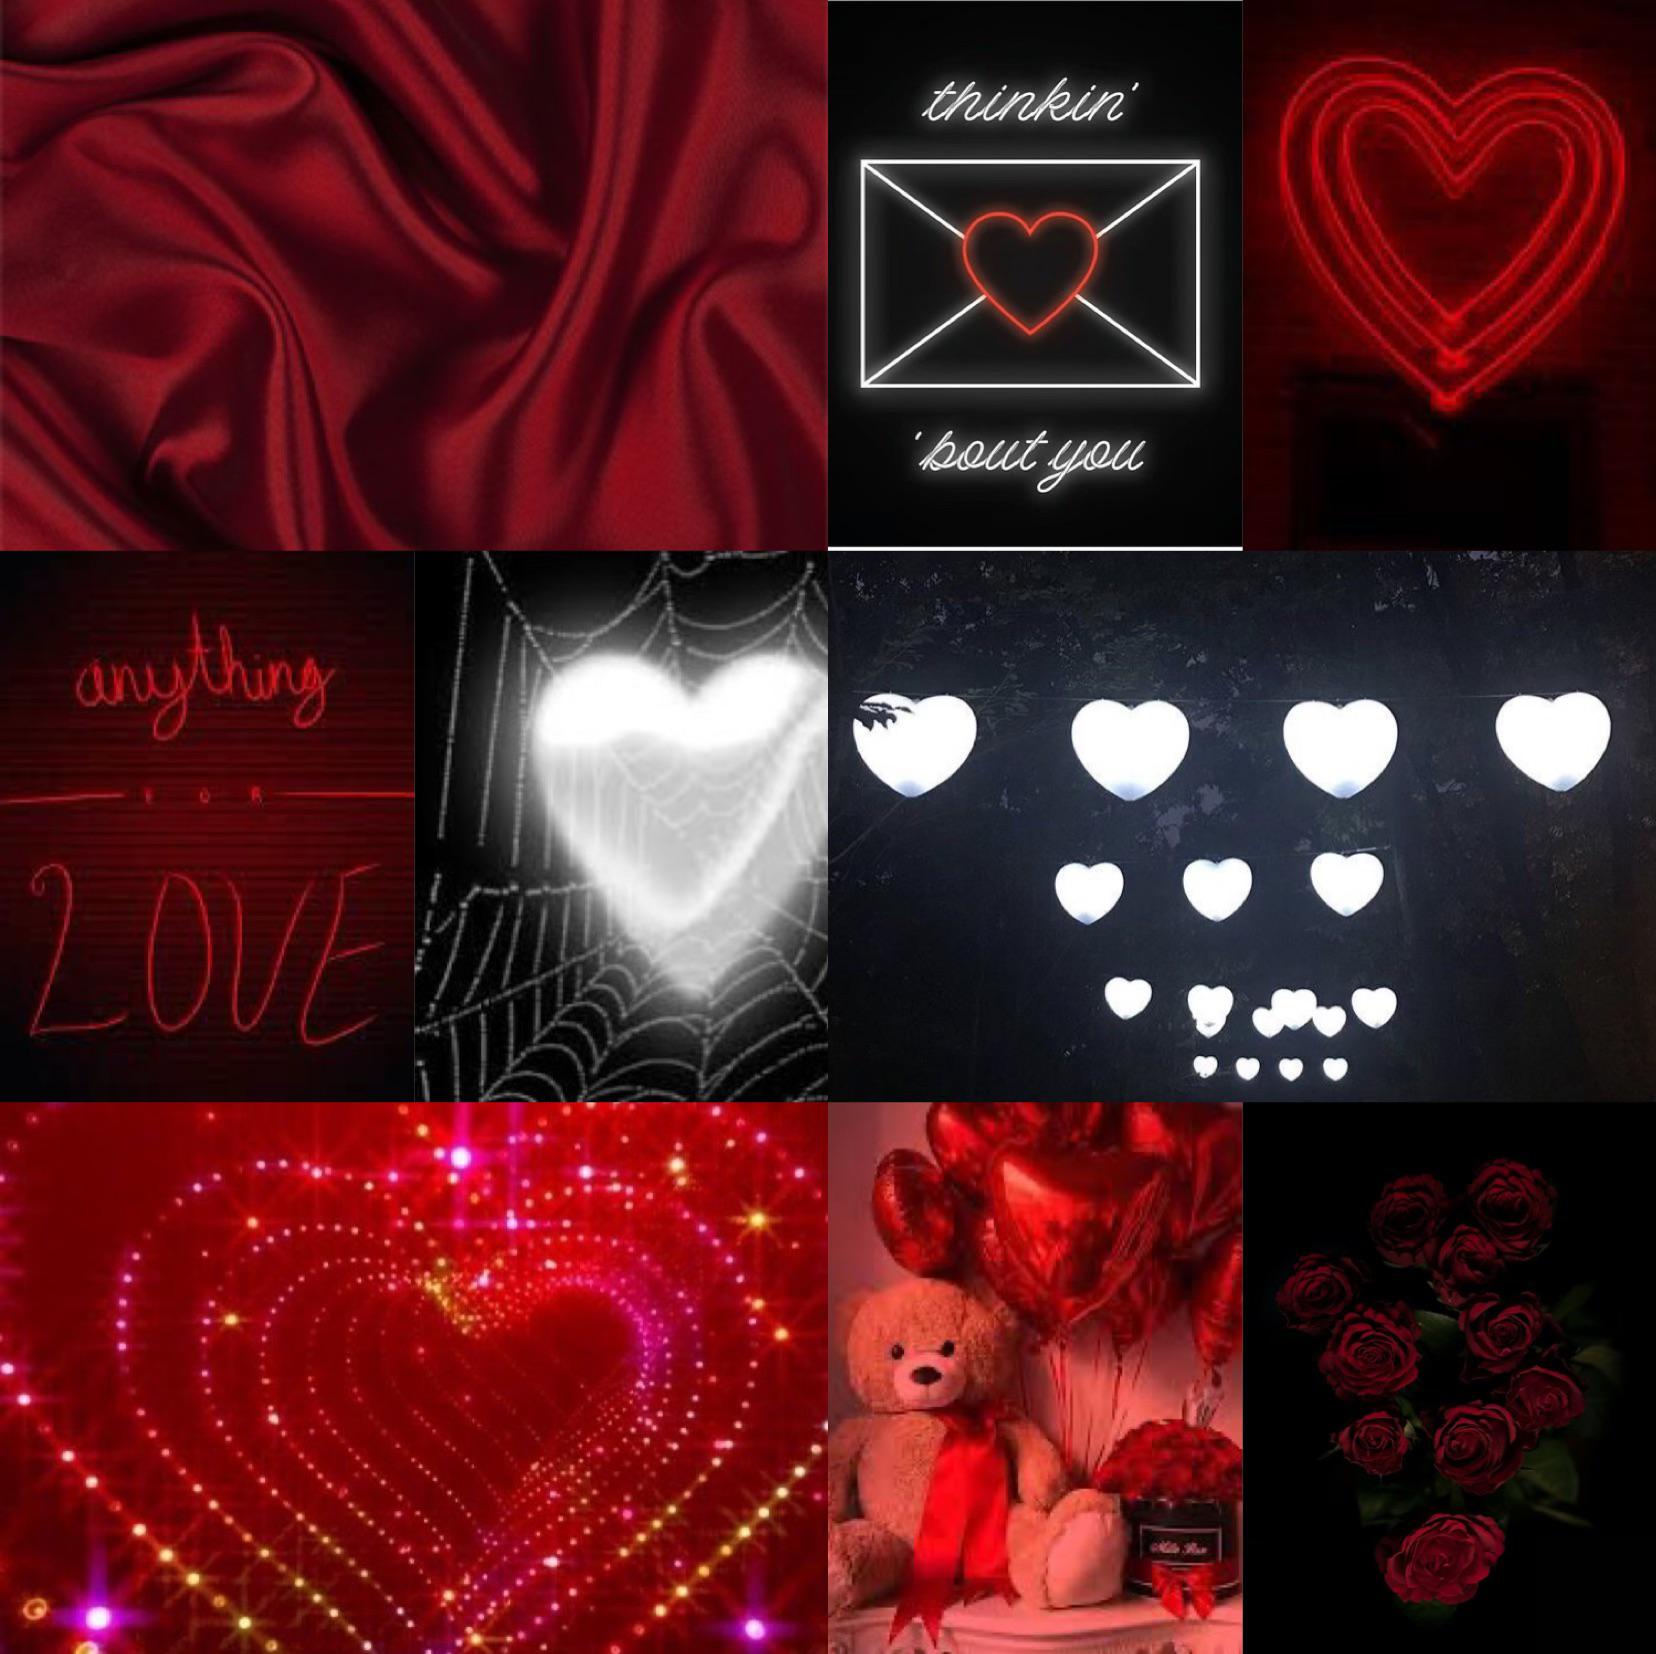 A collage of red and black aesthetic images including hearts, roses, and a spider web. - Lovecore